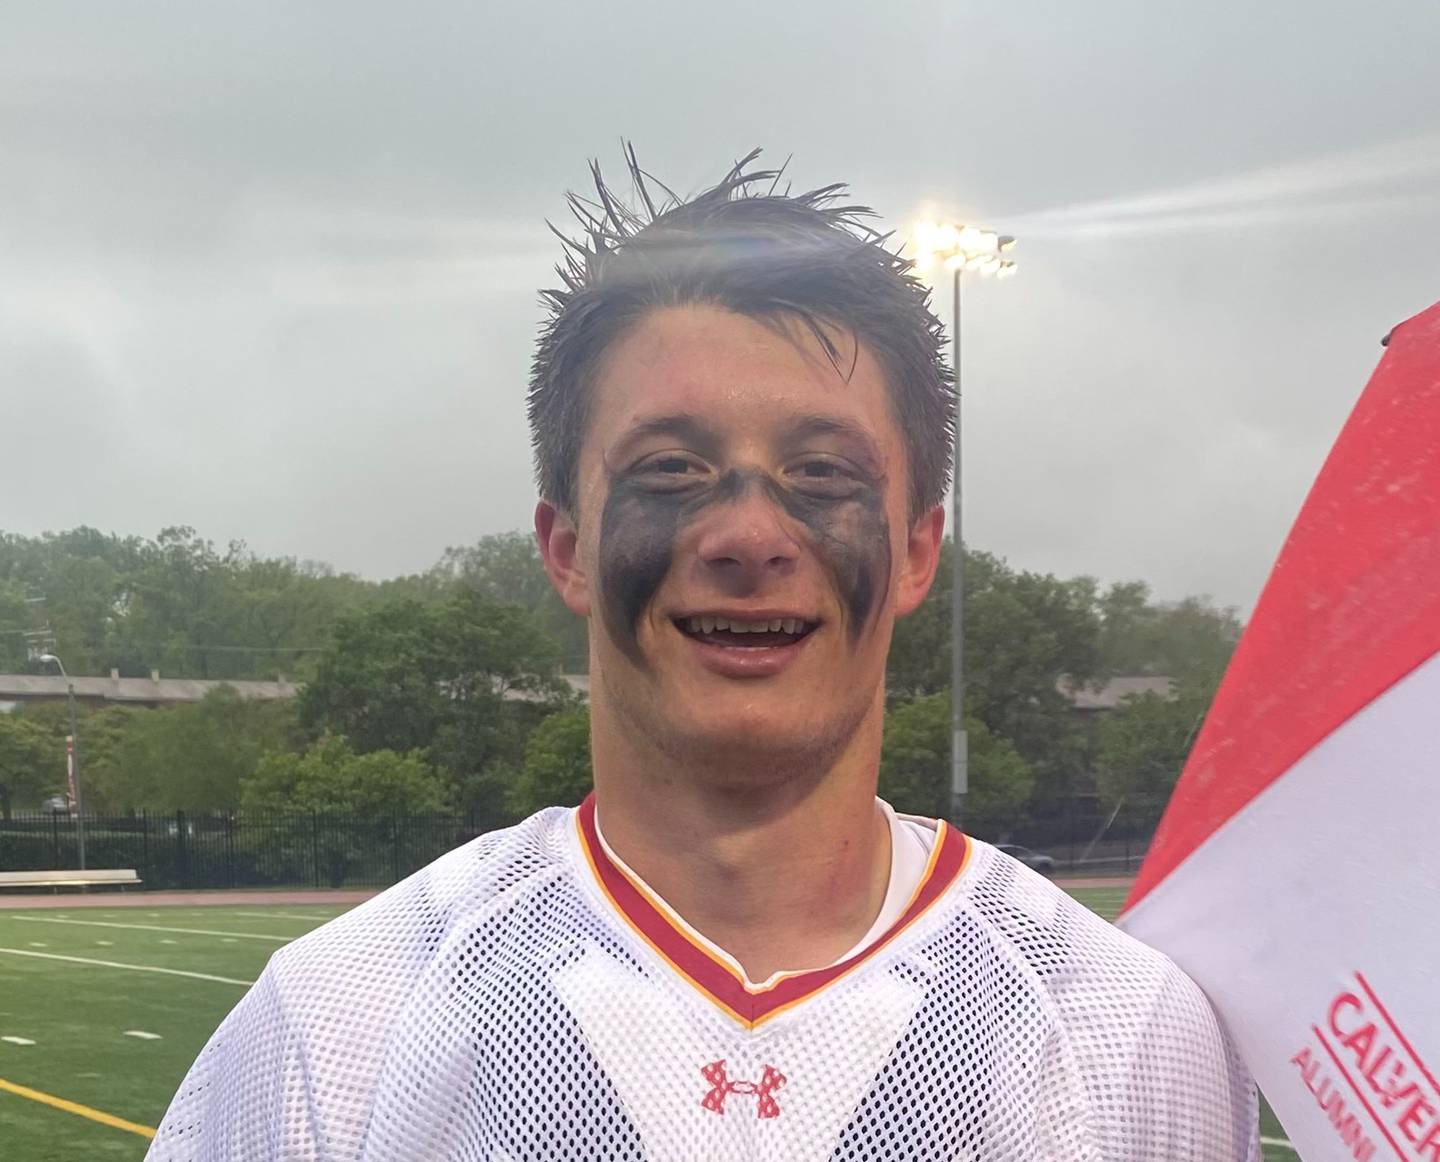 Jackson Strickland had a big effort Friday for Calvert Hall, winning 16-of-18 faceoffs against Boys' Latin. The fourth-ranked Cardinals got a goal from Kyle Basco in overtime for an 8-7 victory over No. 3 Boys' Latin in a MIAA A Conference lacrosse thriller in Towson.